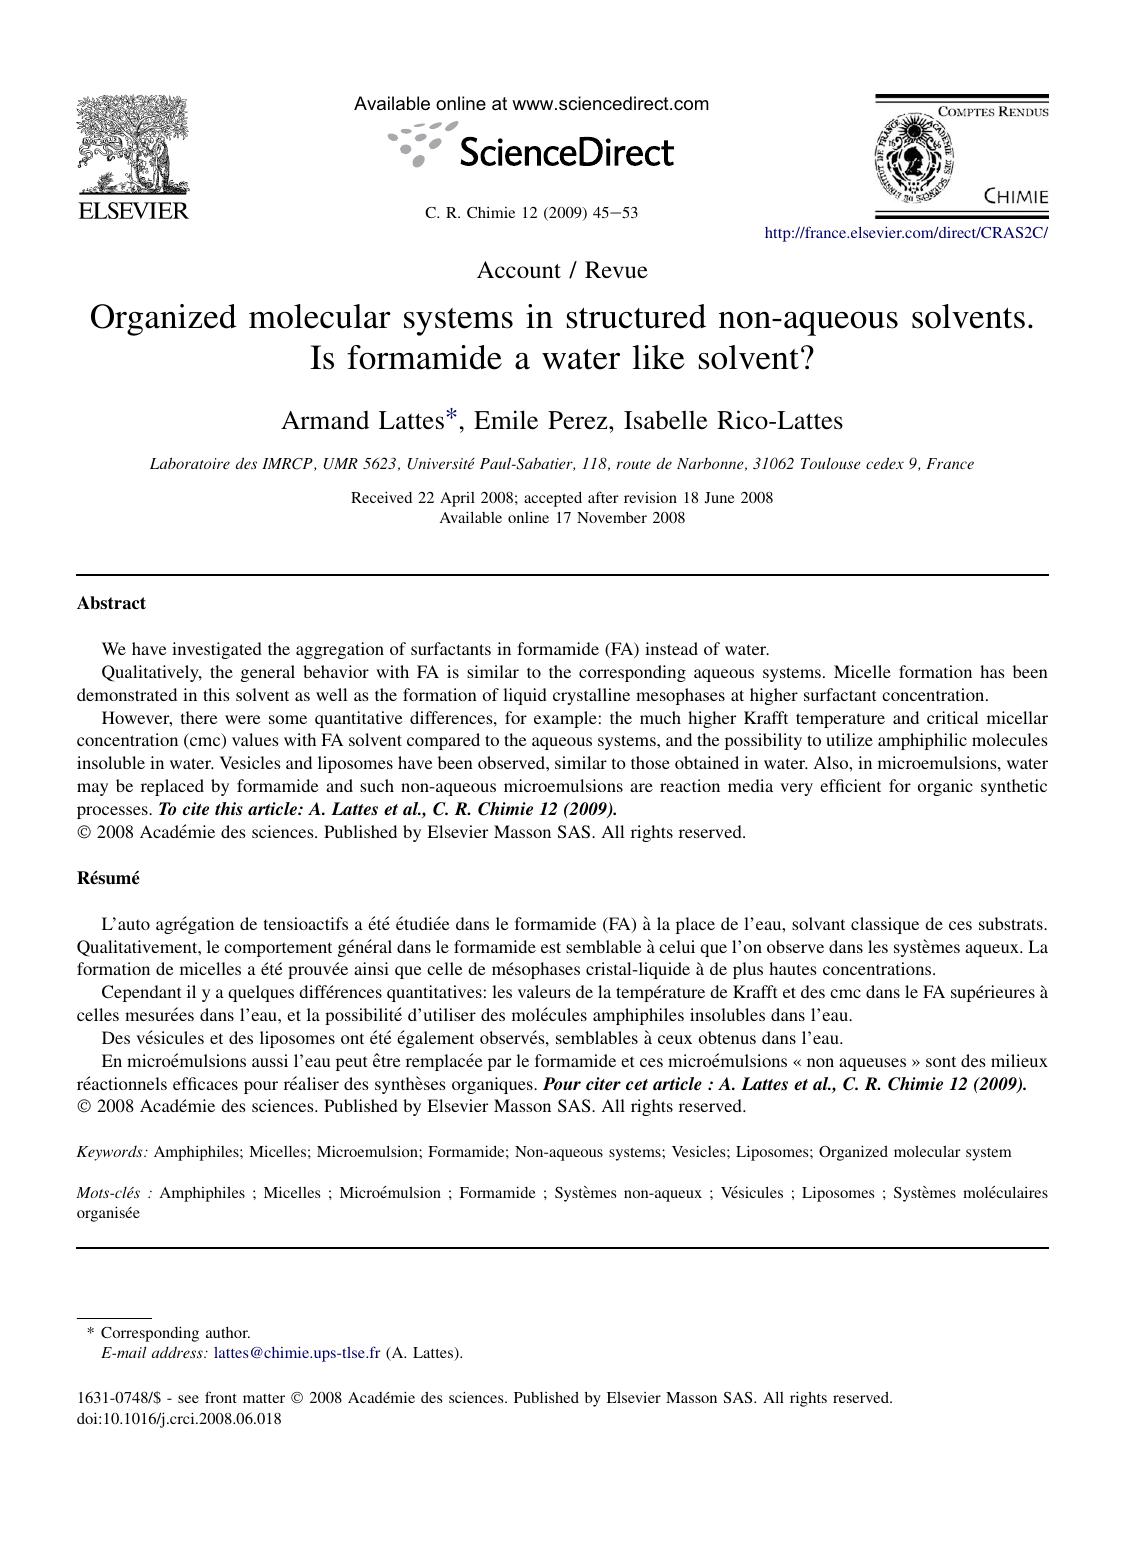 Organized molecular systems in structured non-aqueous solvents. Is formamide a water like solvent? by Armand Lattes; Emile Perez; Isabelle Rico-Lattes